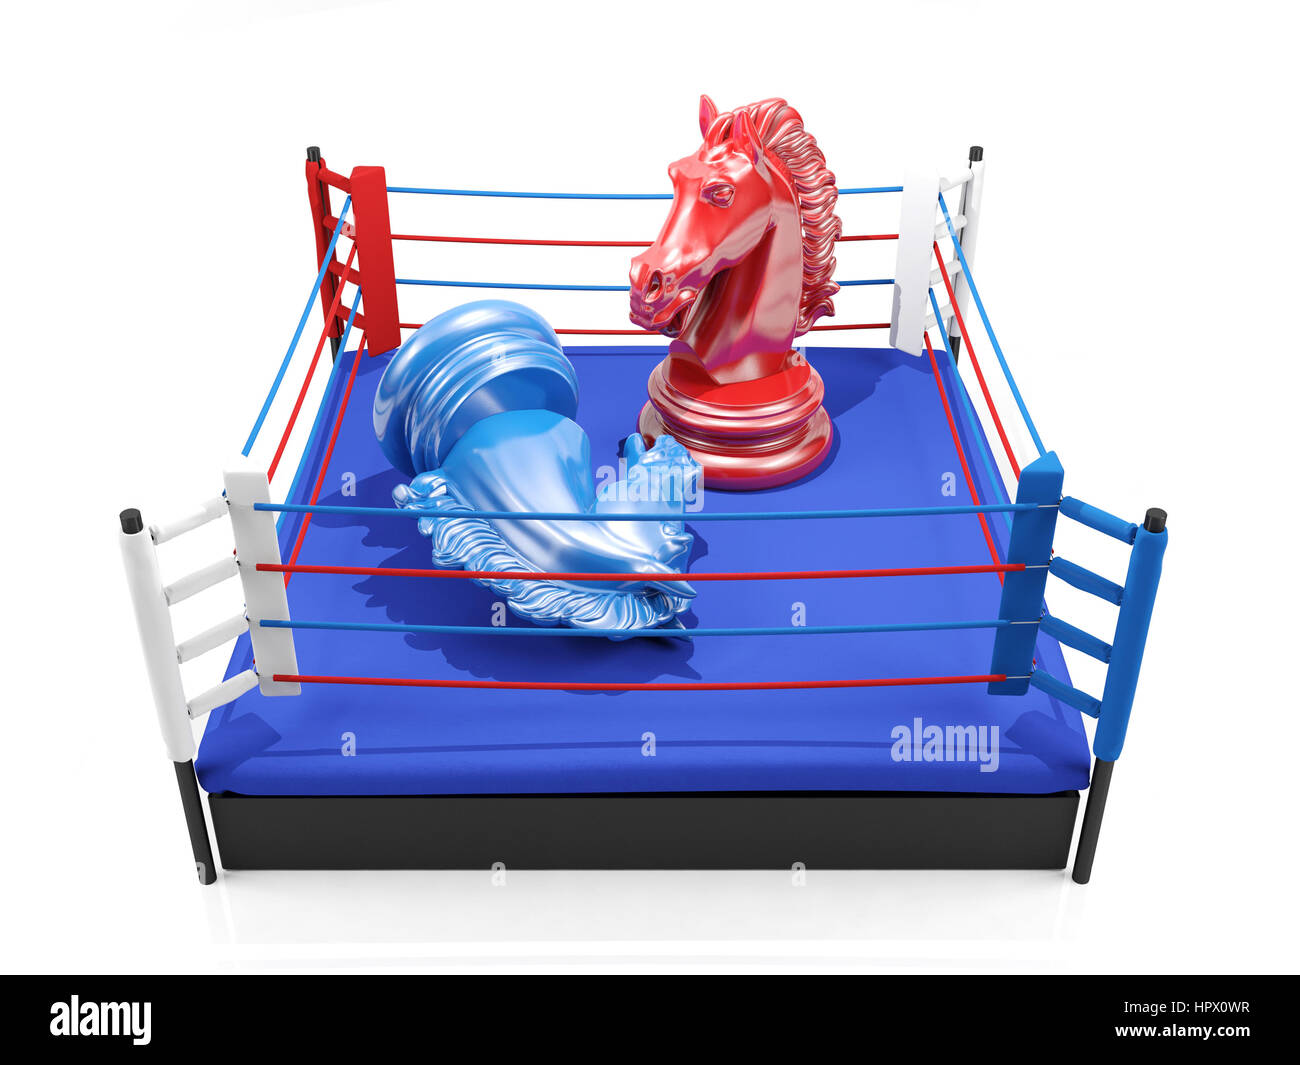 Red chess knight wins over blue chess knight on boxing ring, strategic competition concept Stock Photo